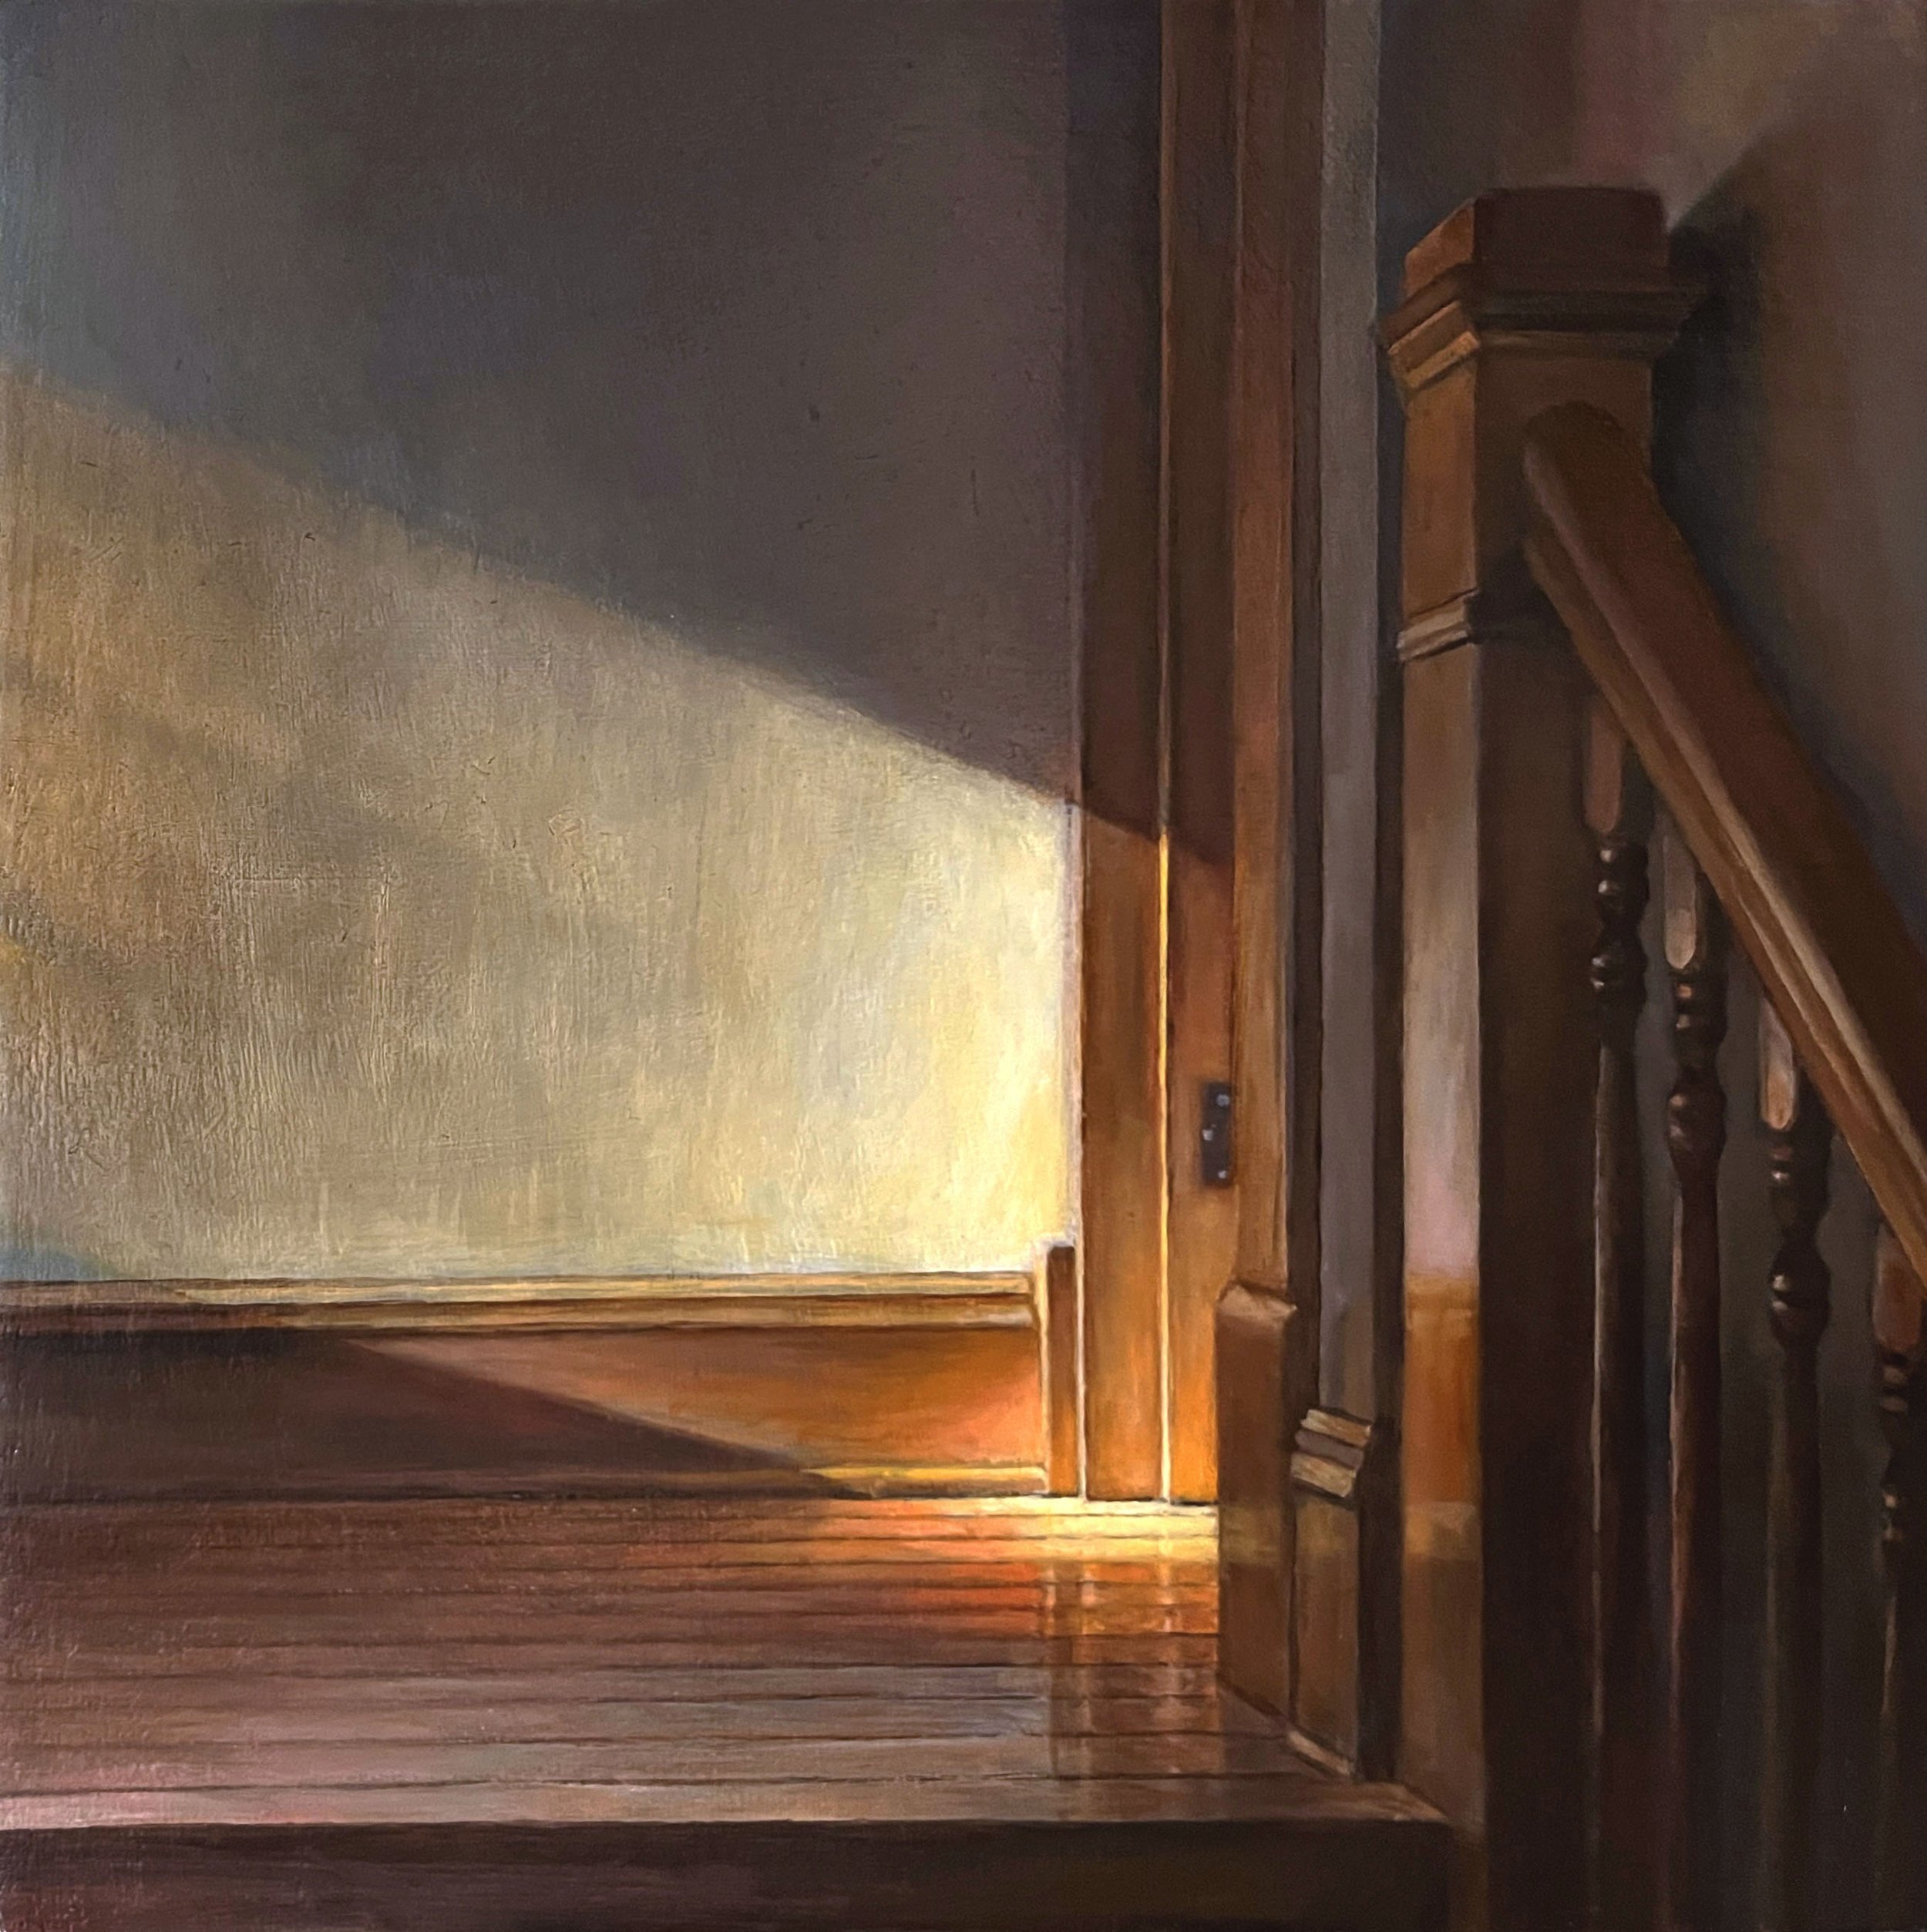   Stairway Light   2023  Oil on linen over panel  8 x 8 inches   